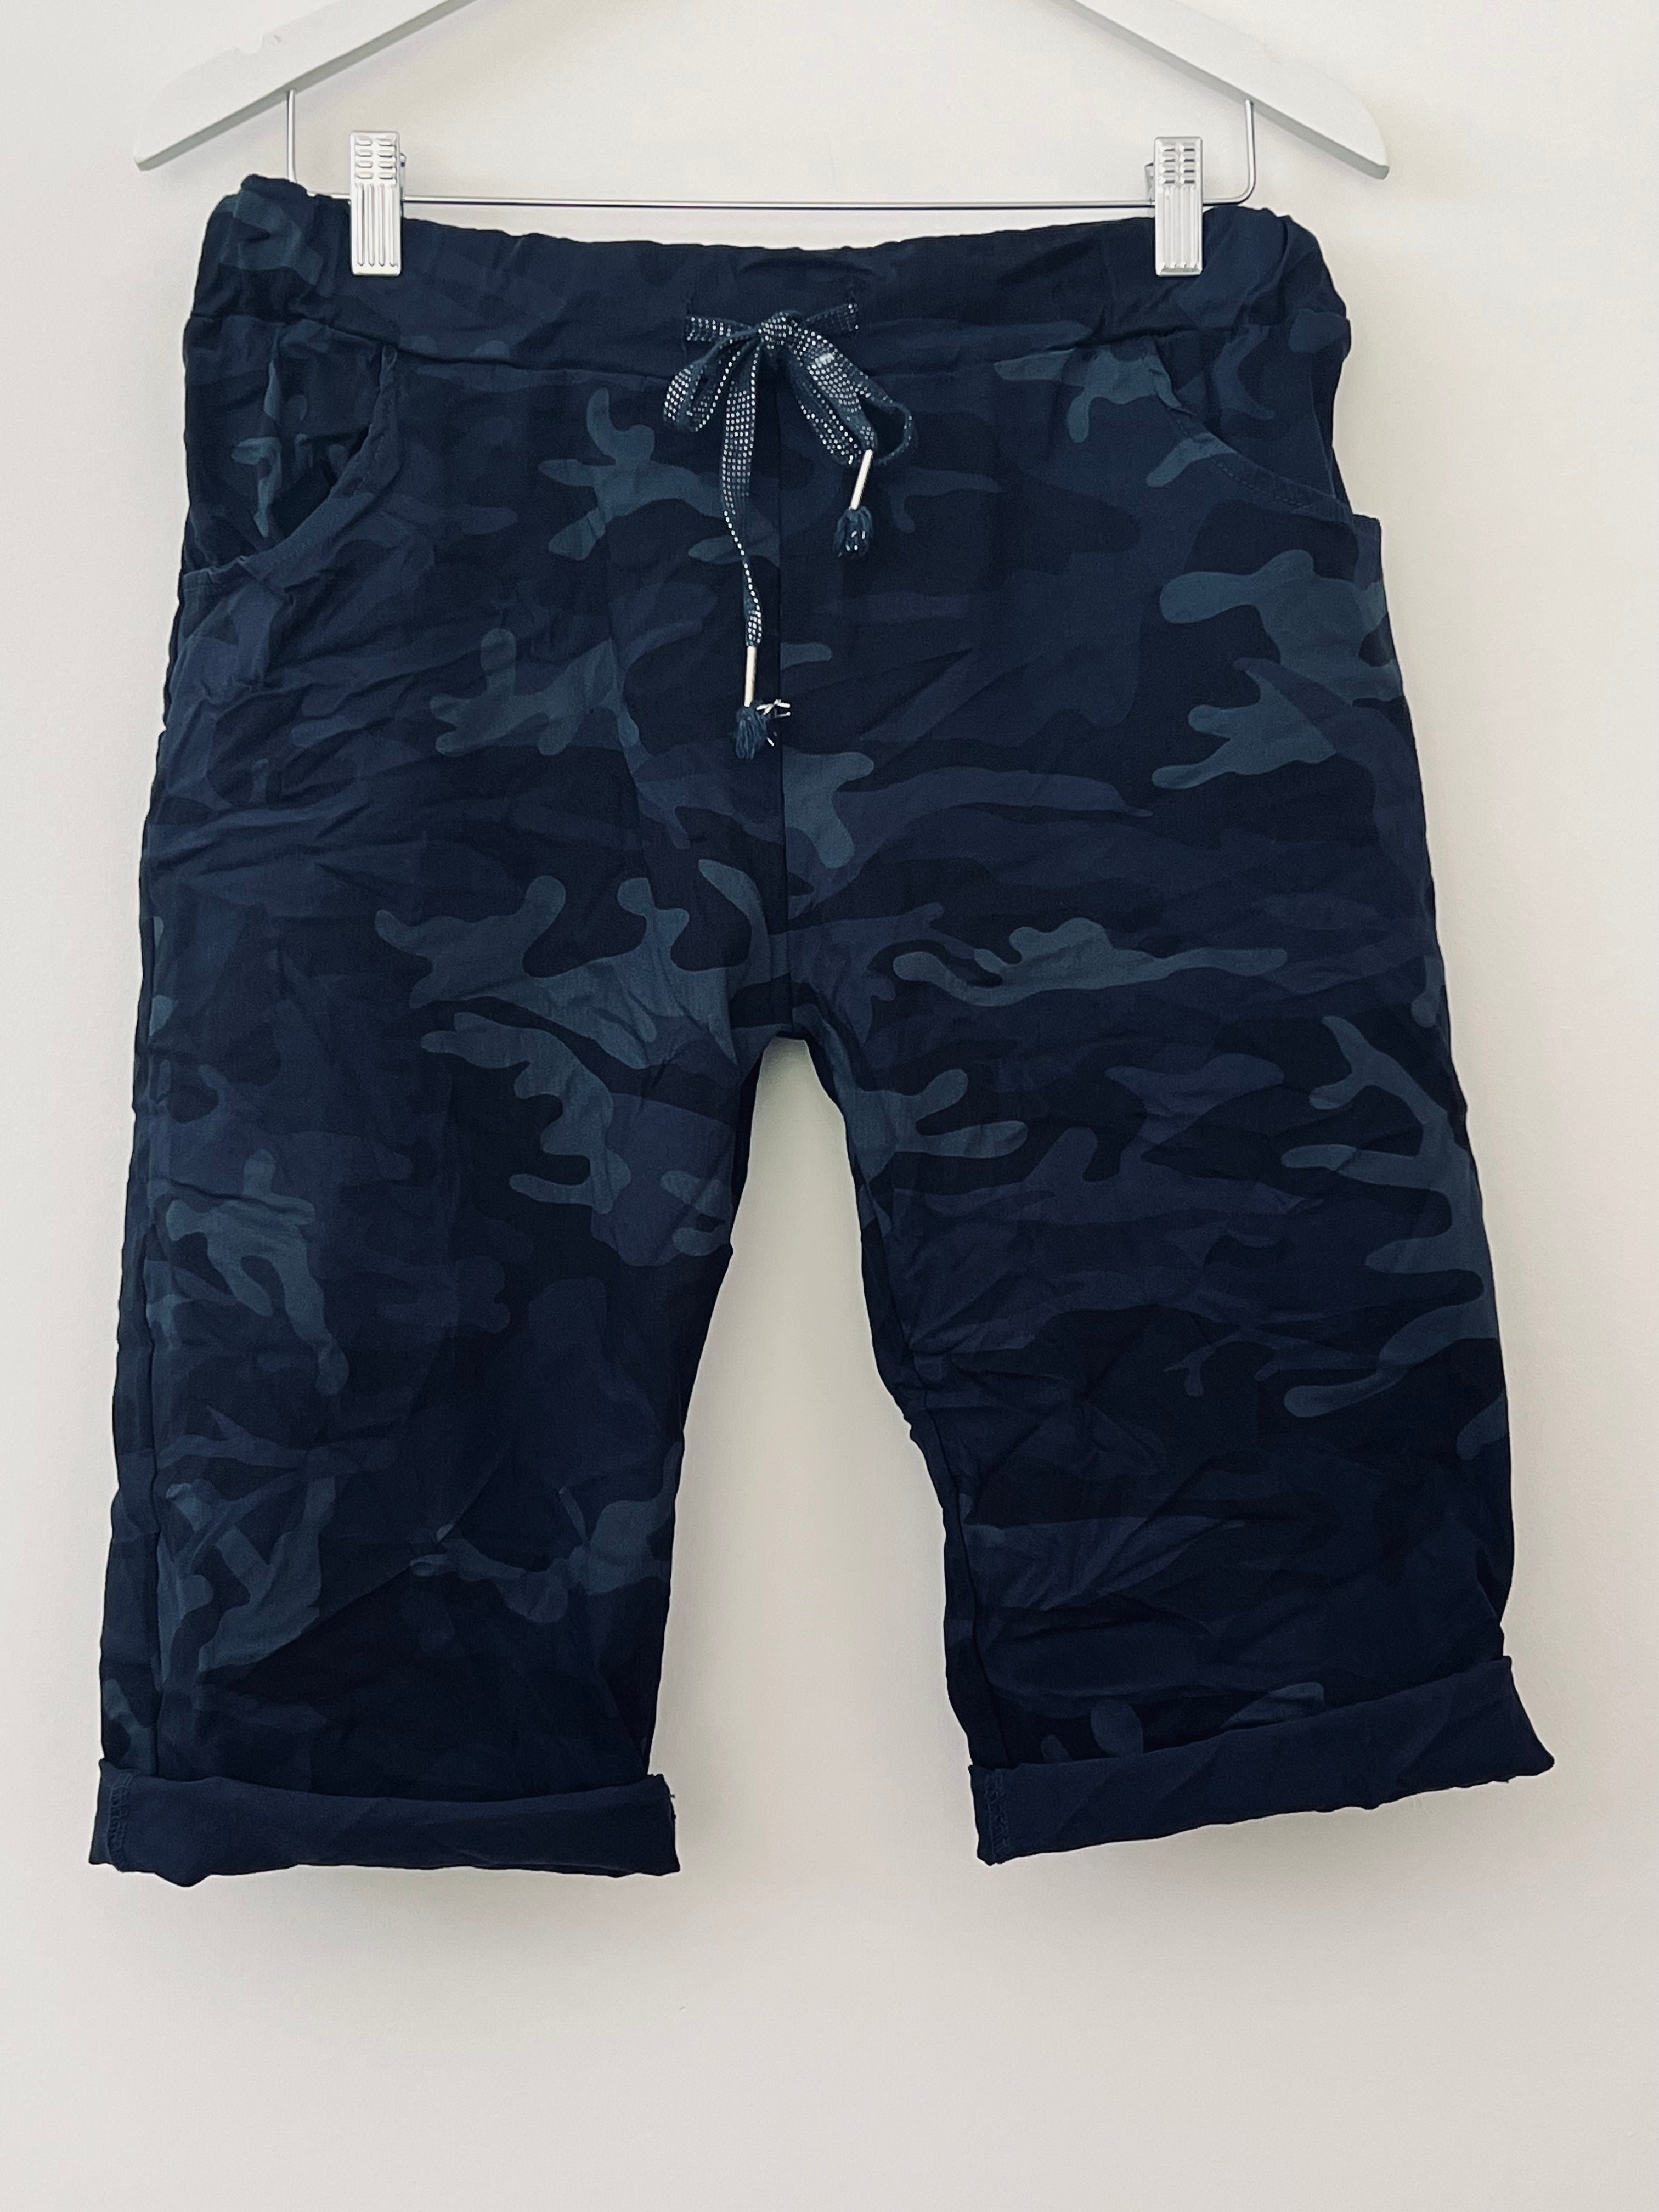 Super Stretch Jogger Shorts in Ink Camo